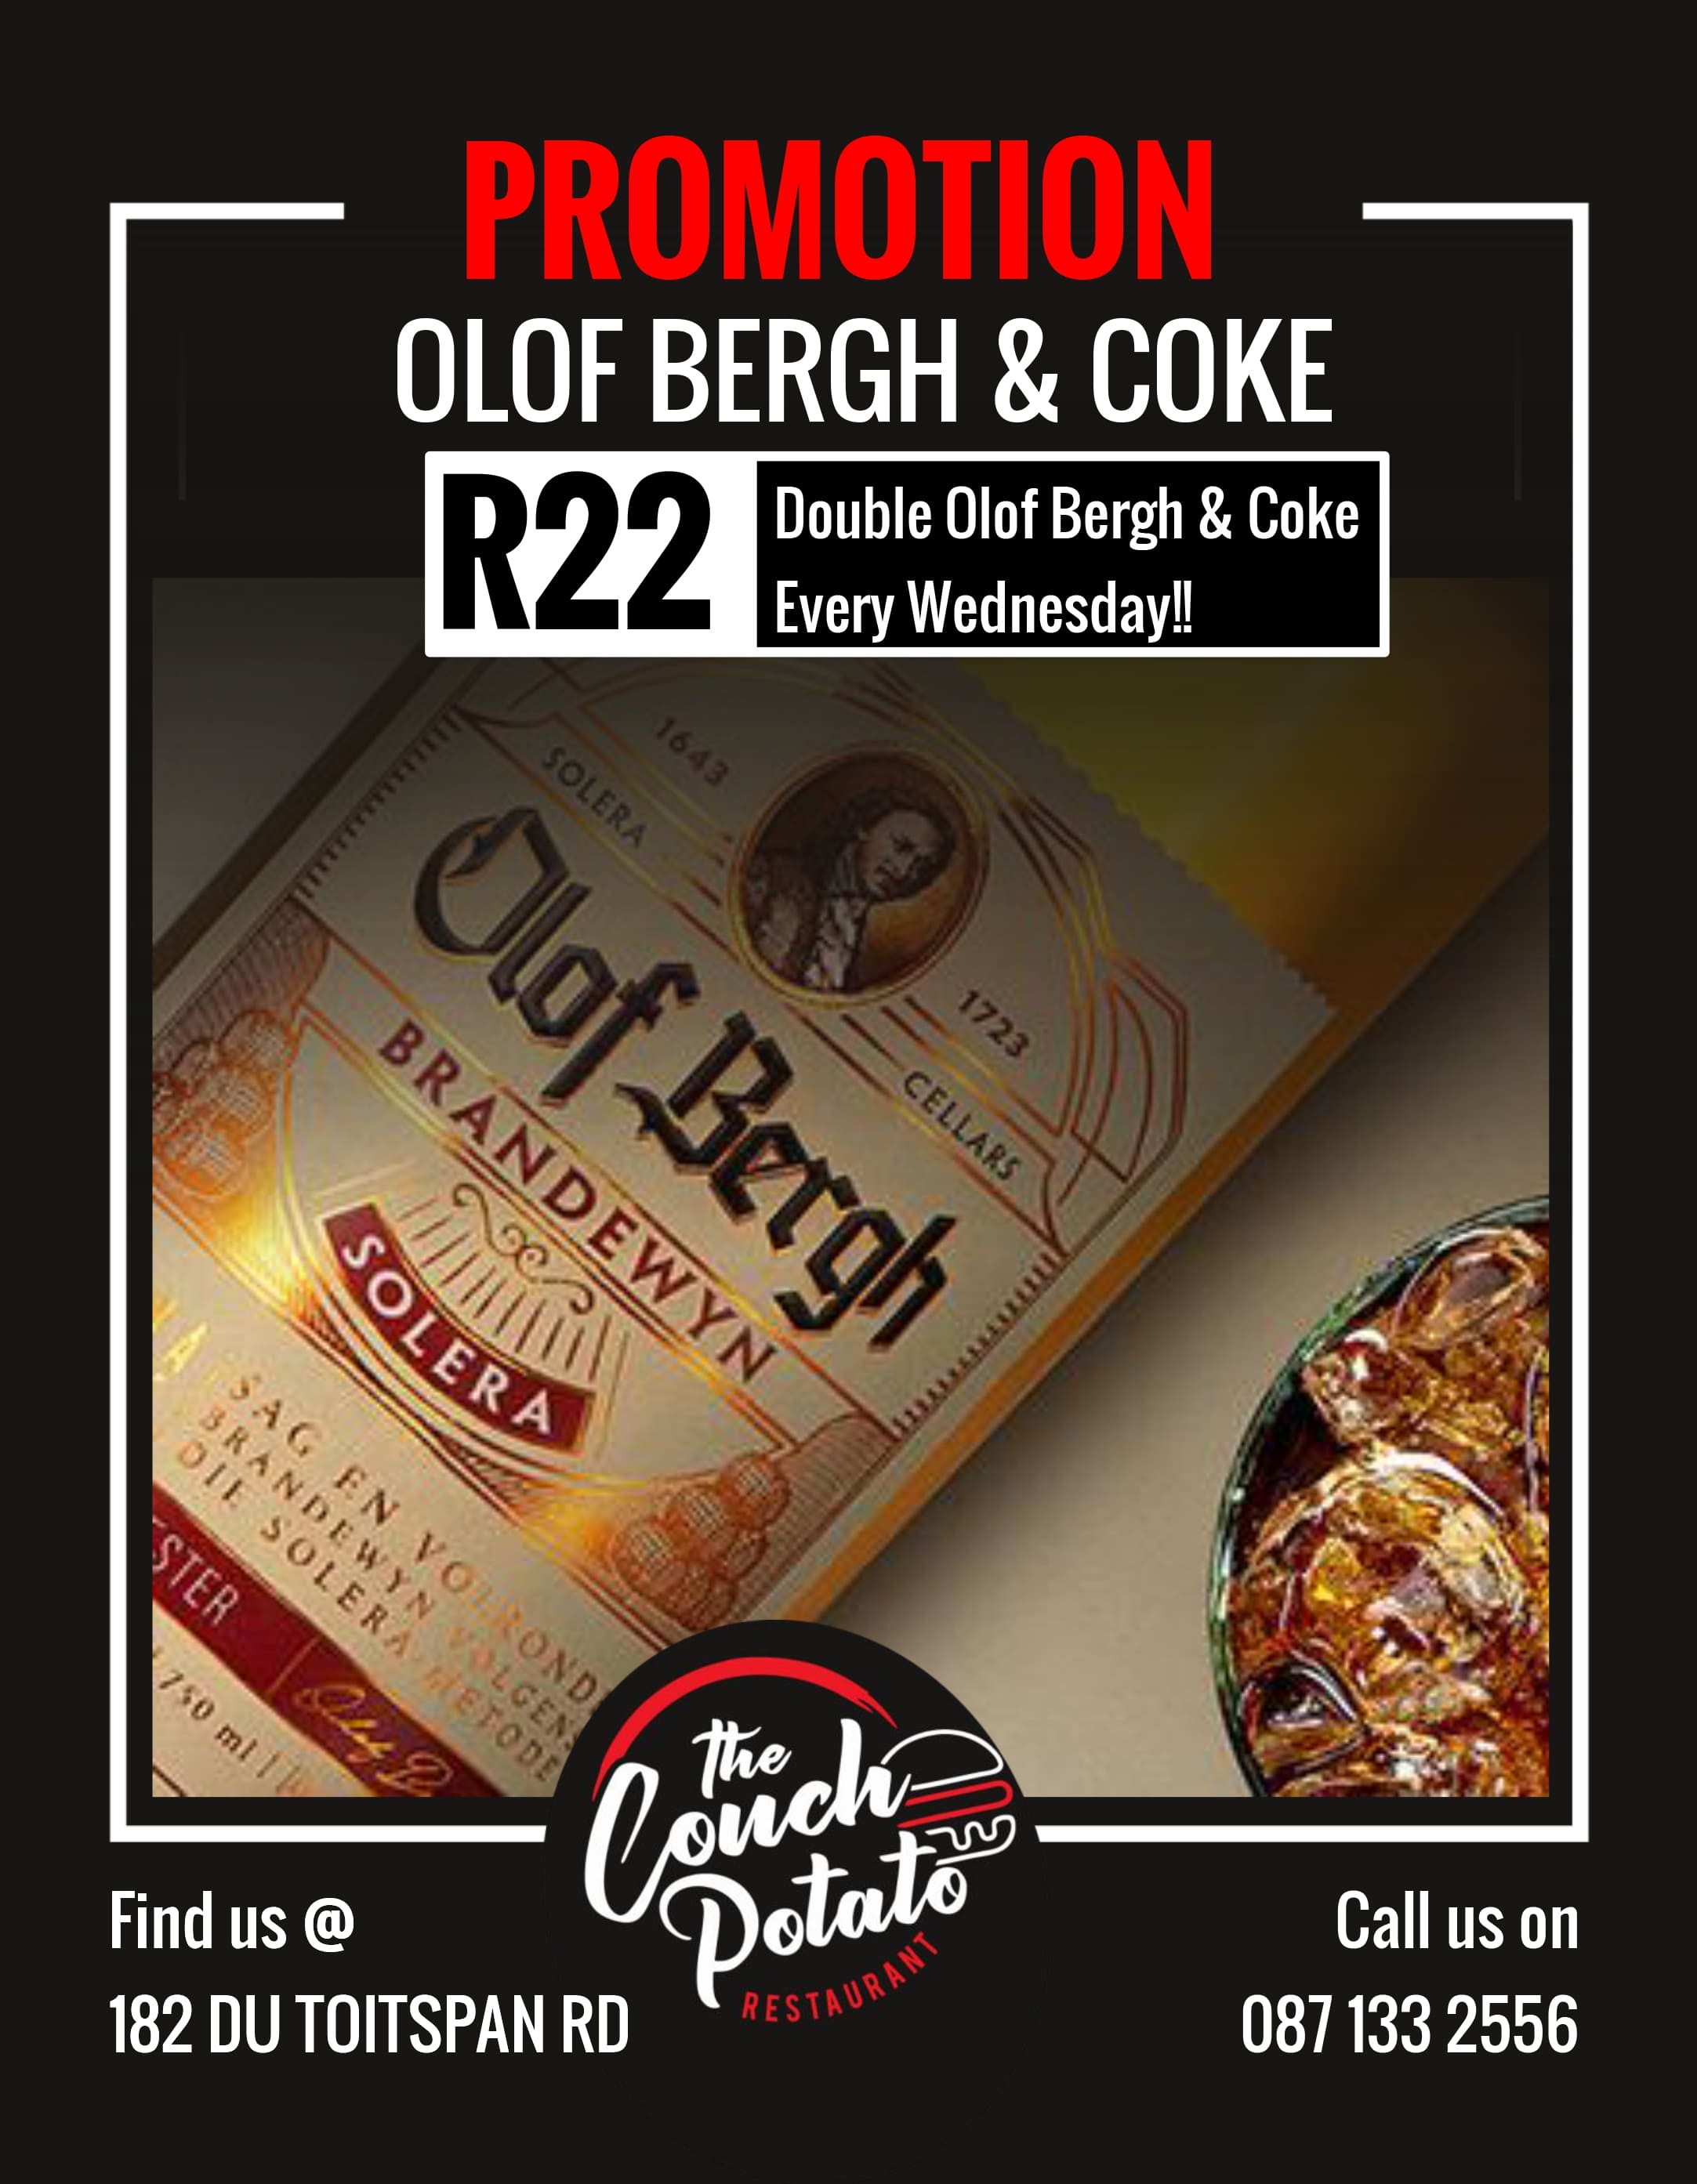 THE_COUCH_POTATO-Olof_Bergh_and_Coke_Promotion-KCP-SP-20211124-v1_00a-POSTER